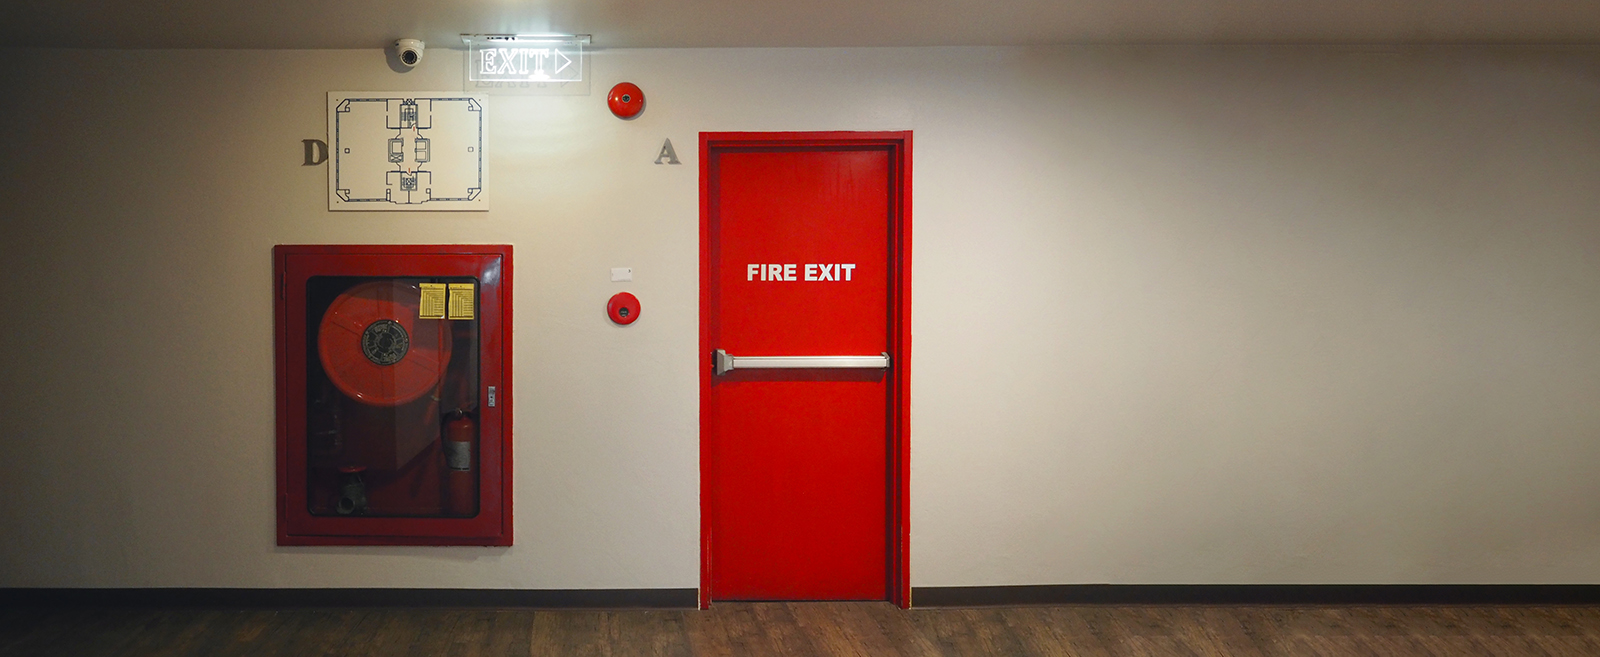 What do you need to know about fire life safety in a high-rise? | Ep. 9